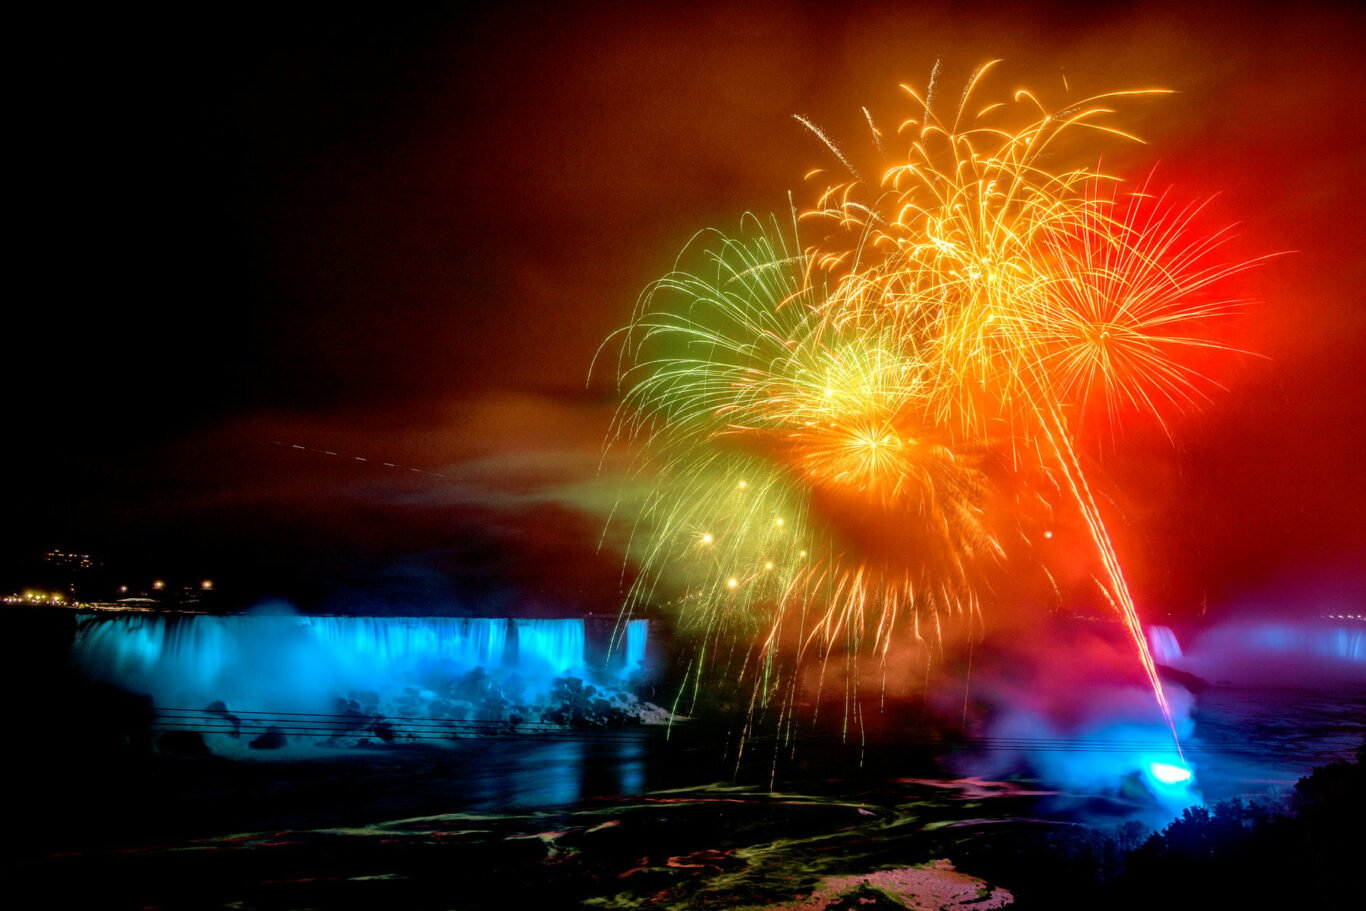 Colorful fireworks display over Niagara Falls on a late summer night.